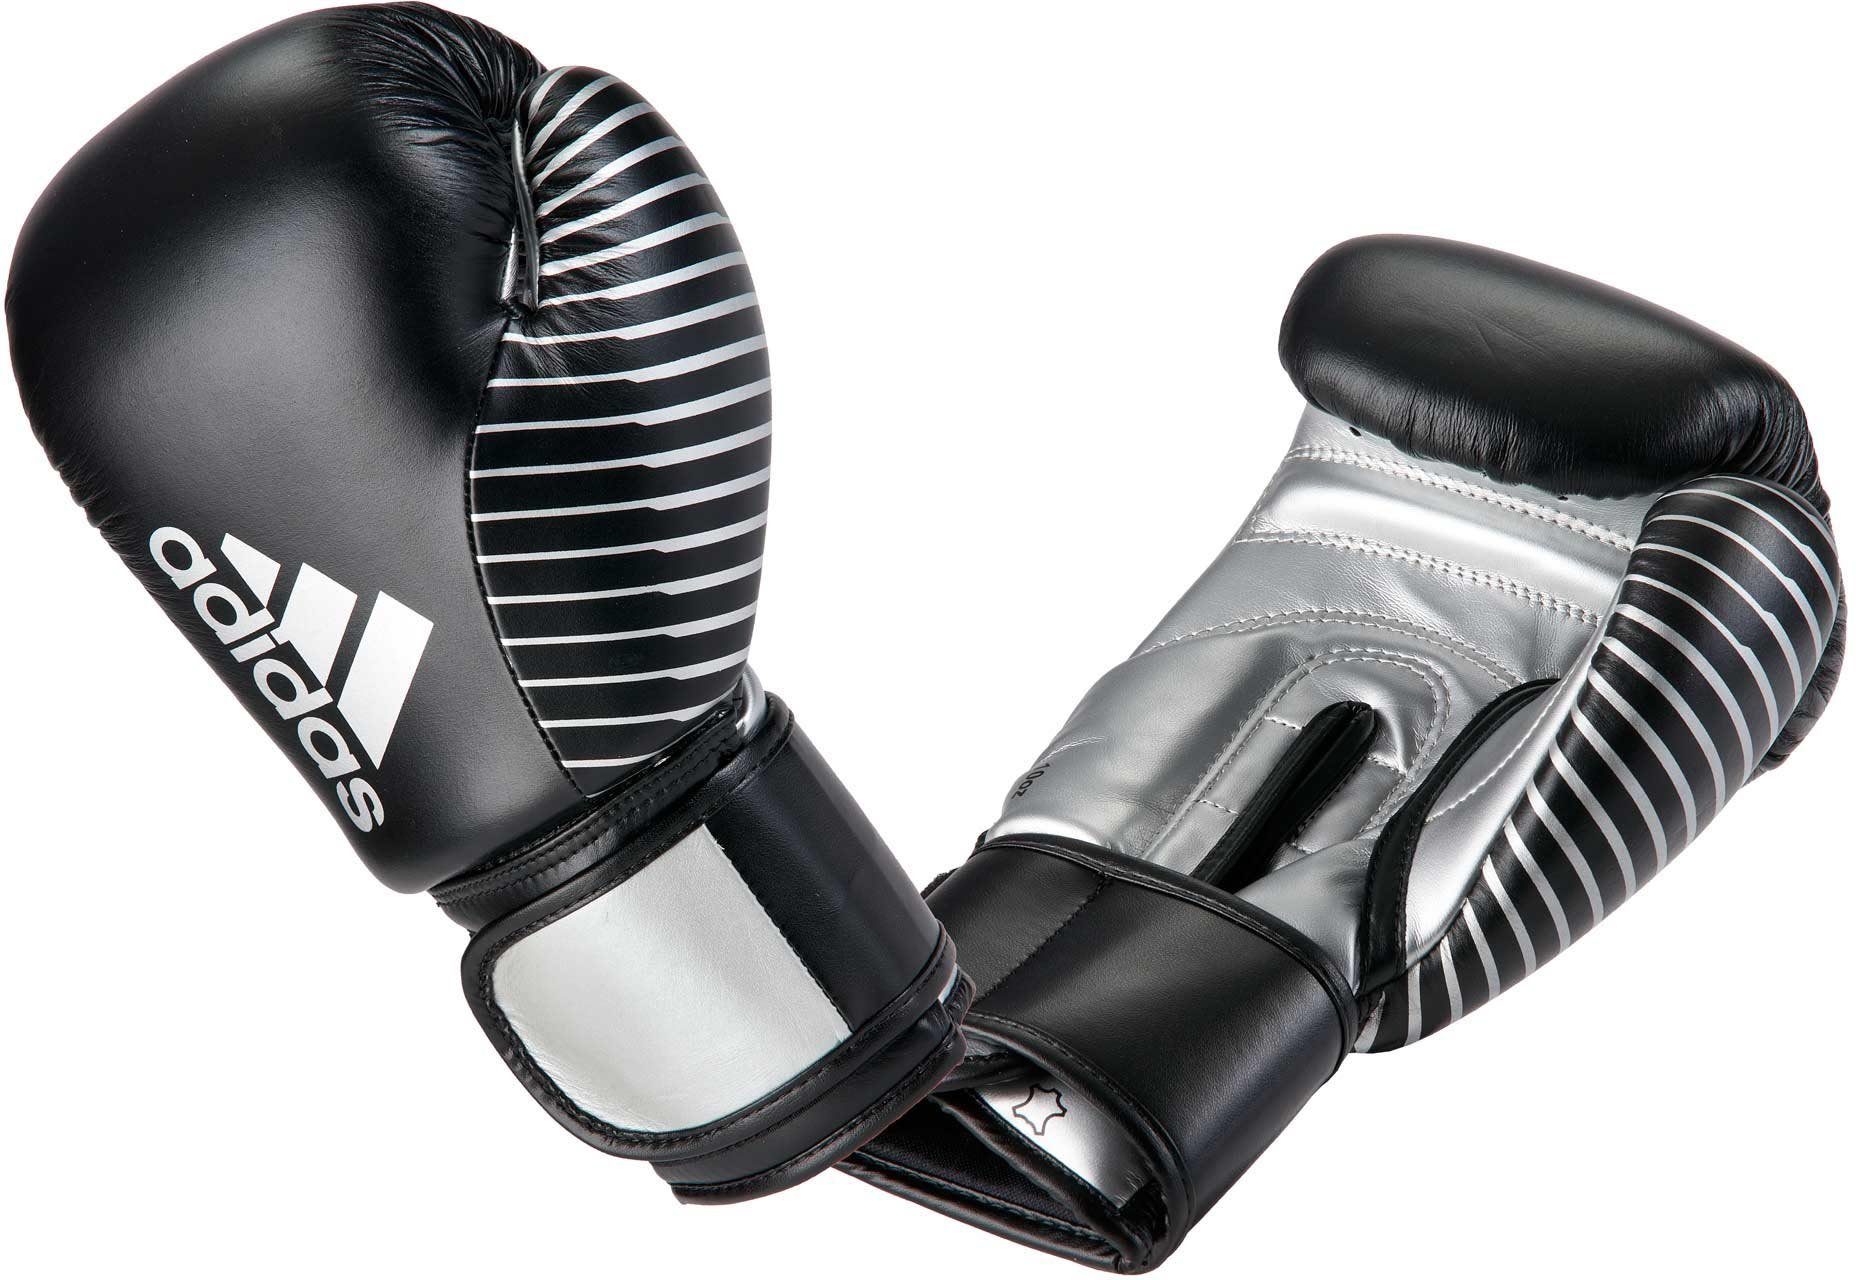 black/silver Performance Handschuh Competition Boxhandschuhe adidas